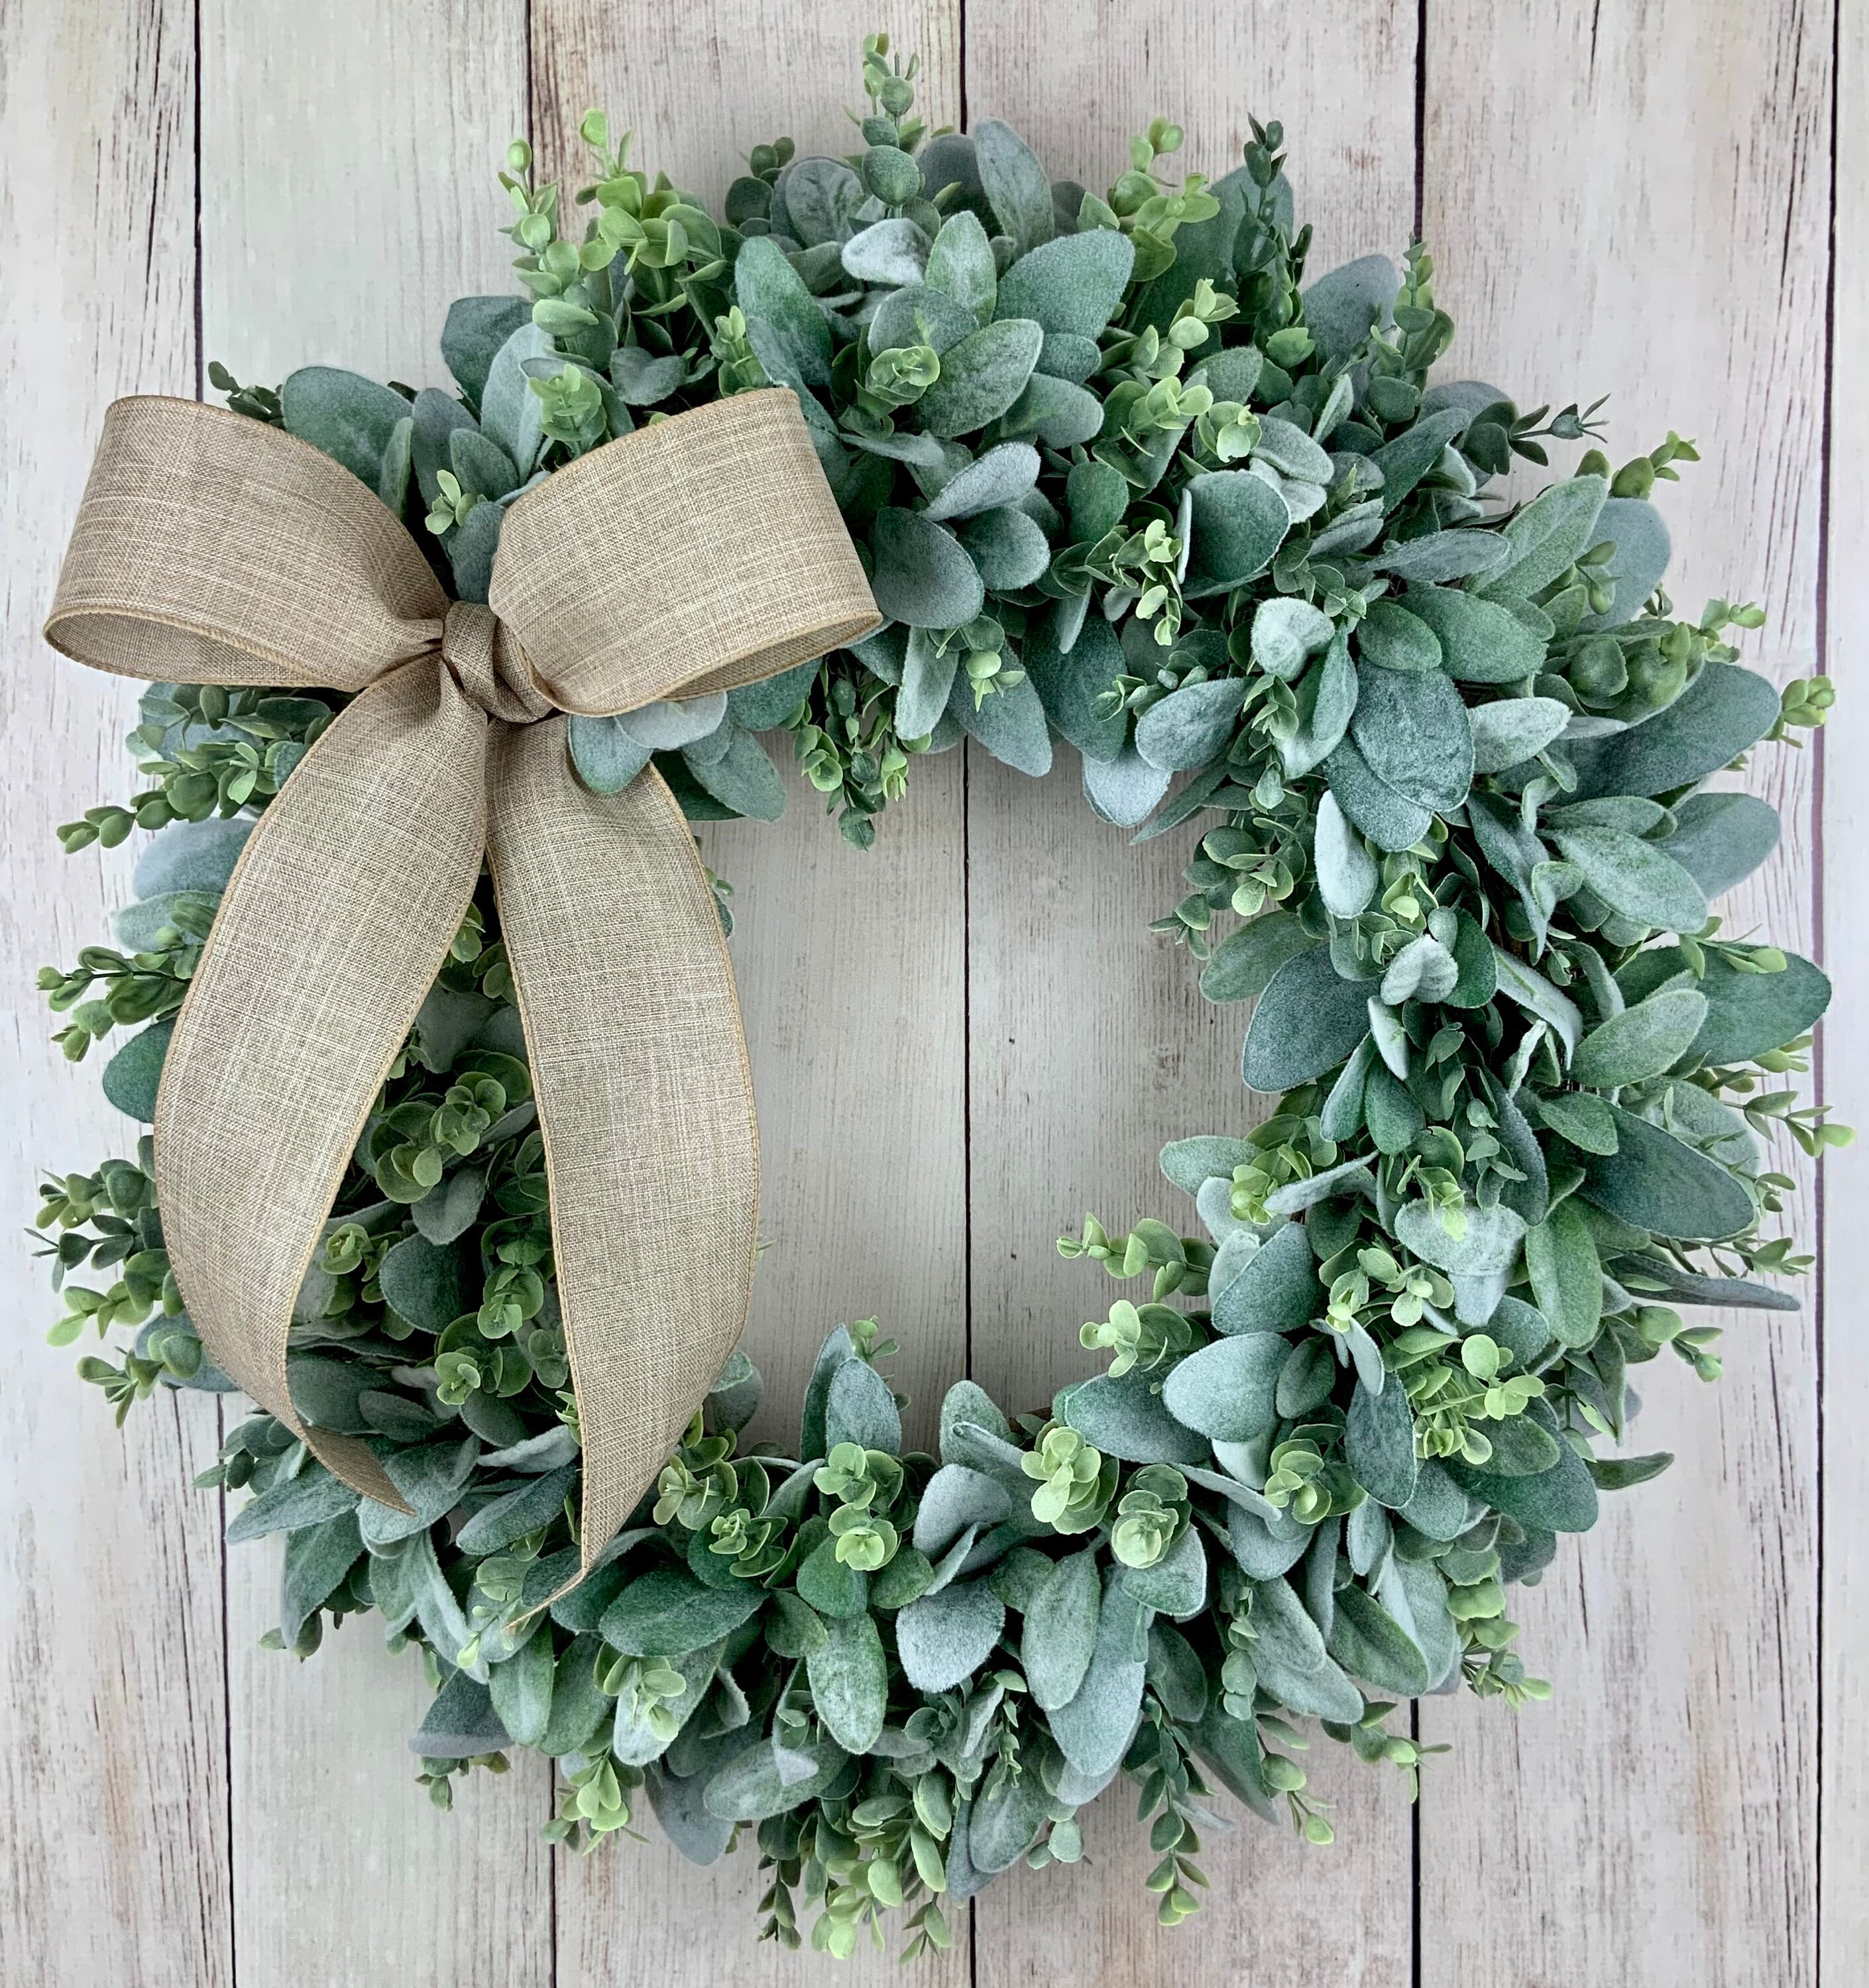 32 XL Outdoor Spring Wreath for Front Door Eucalyptus and Bayleaf With  White Ranunculus and Blueberries for Everyday Decorating 